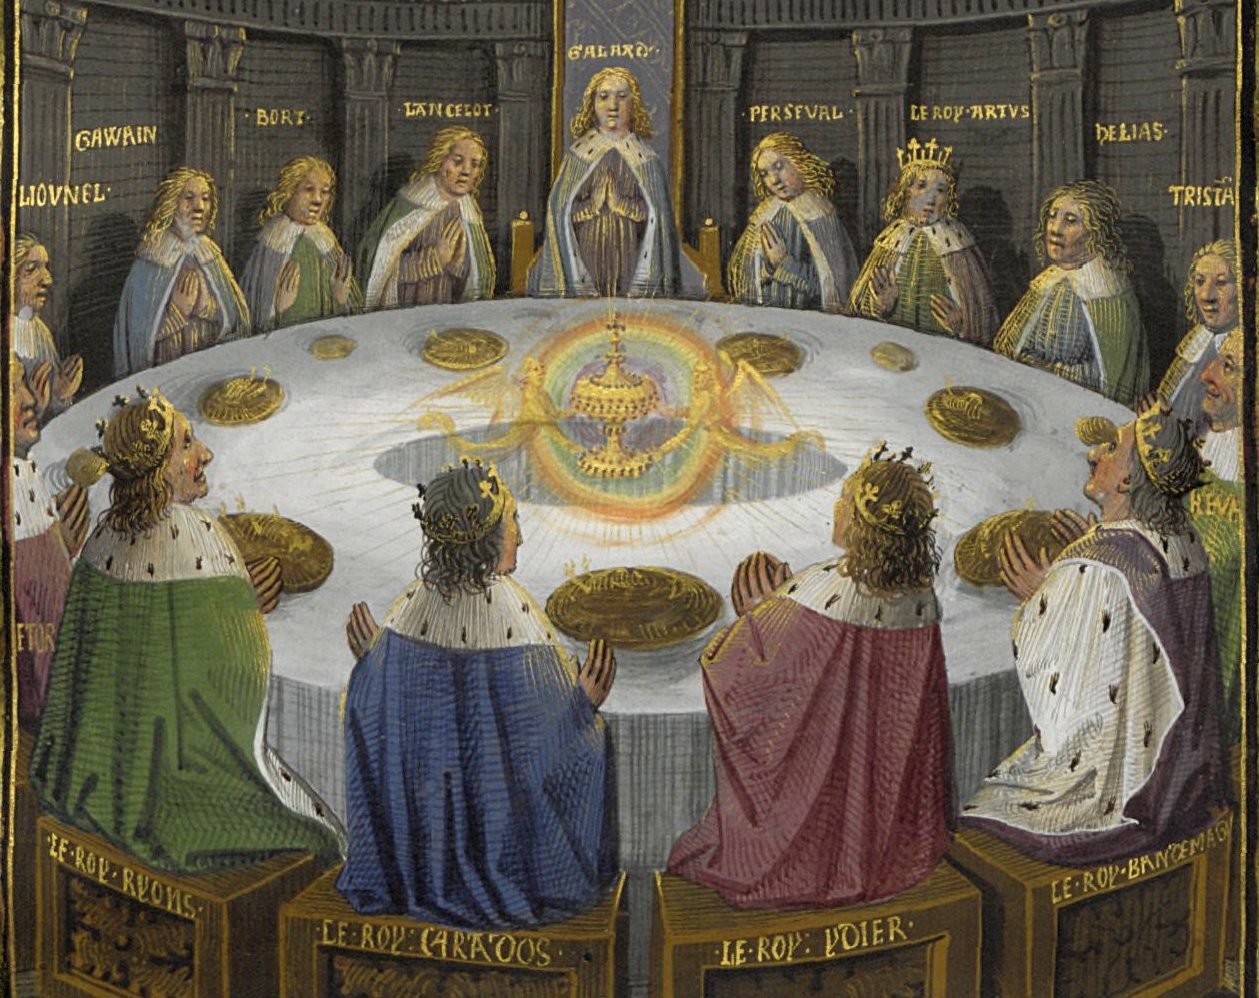 A fifteenth century depiction of King Arthur and his knights sitting at the Round Table